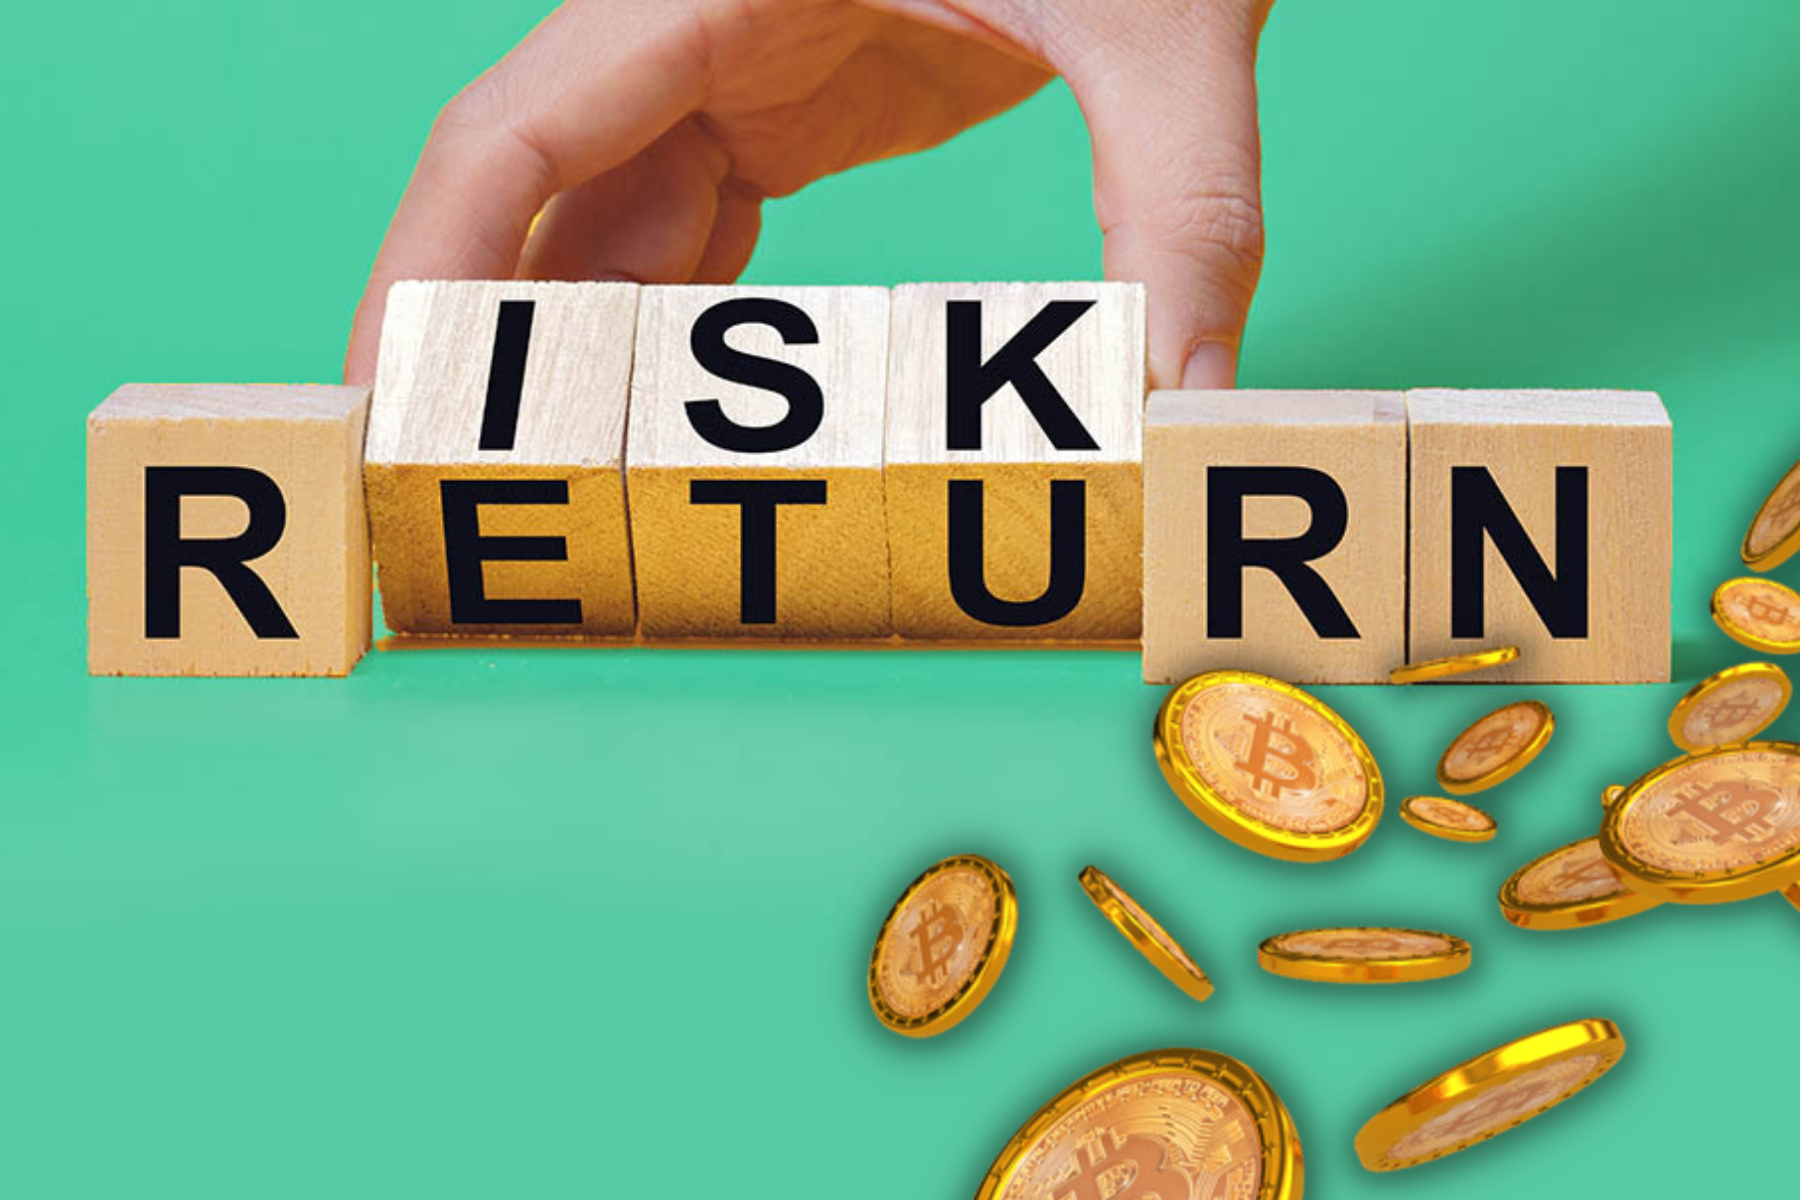 Blocks labeled "Risk and Returns" is placed next to a graphic of falling Bitcoins